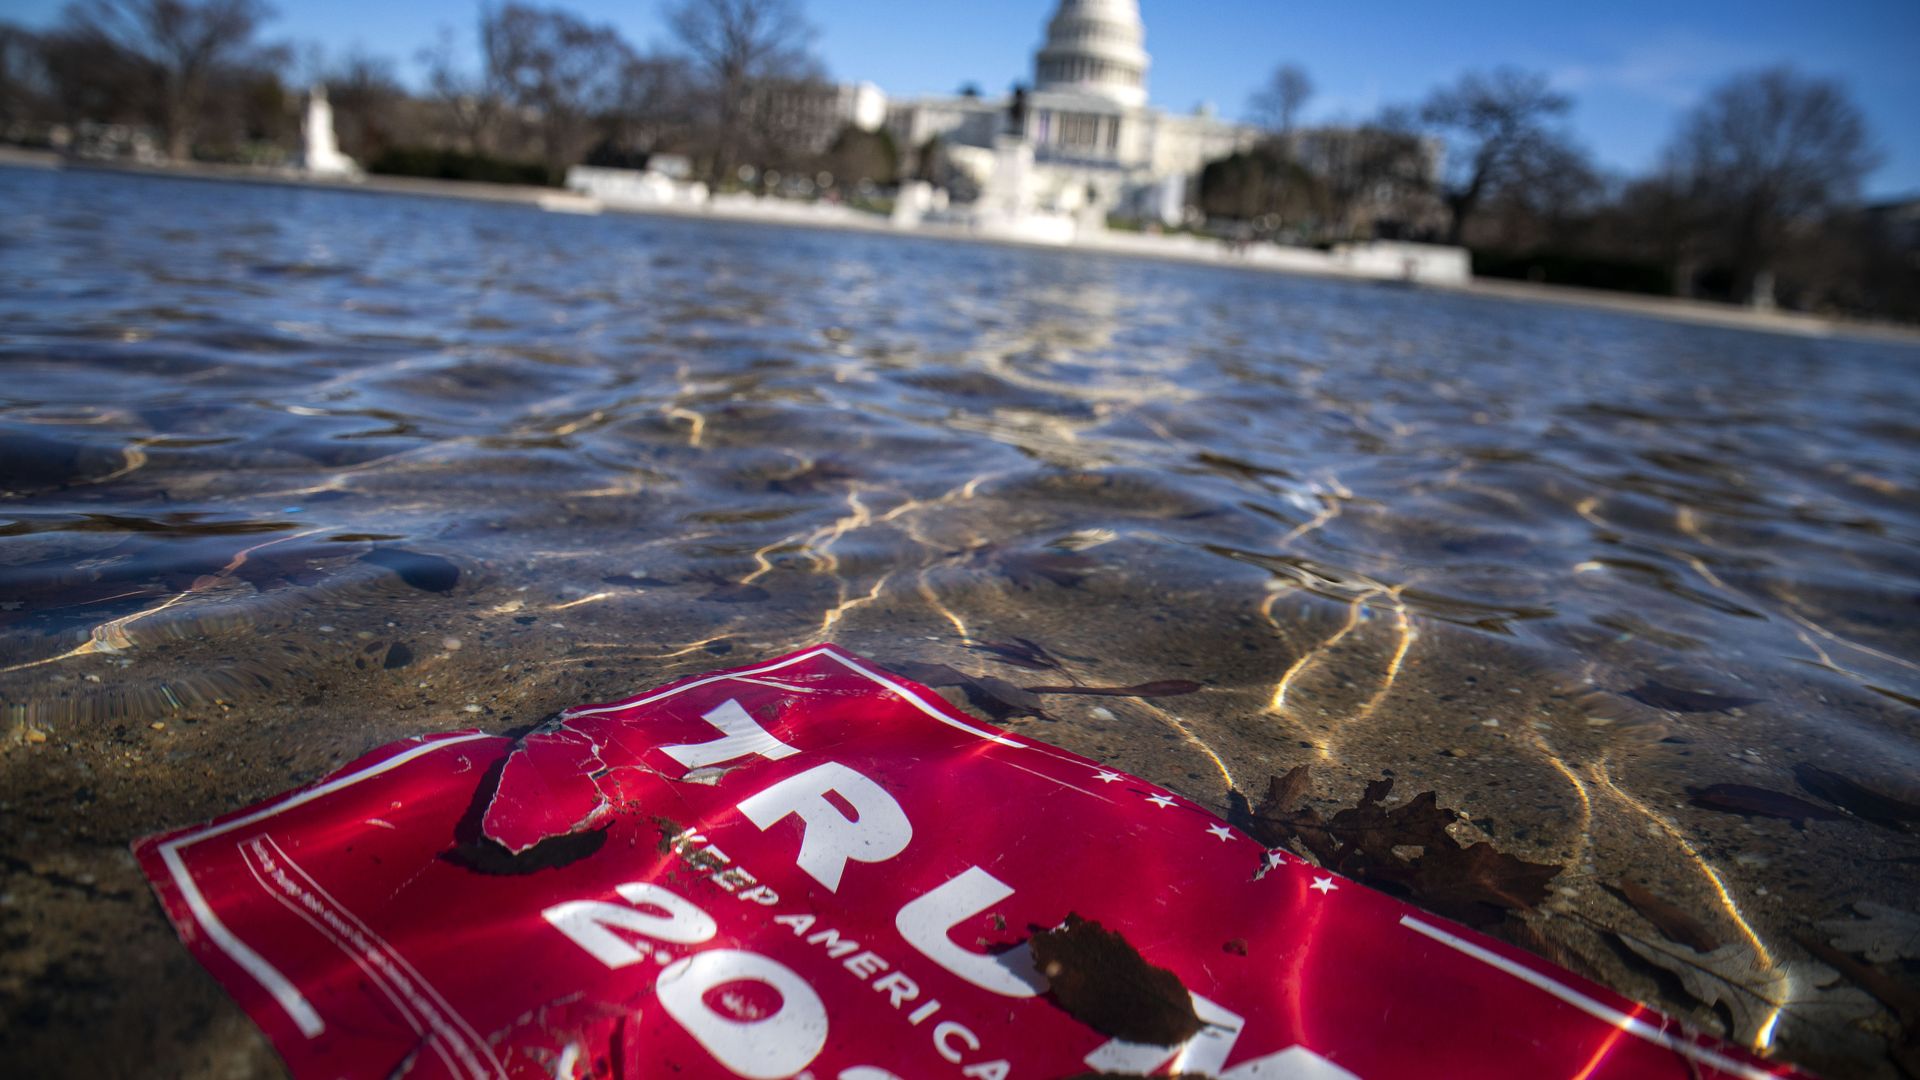 Trump campaign sign floats in river near the Capitol building.